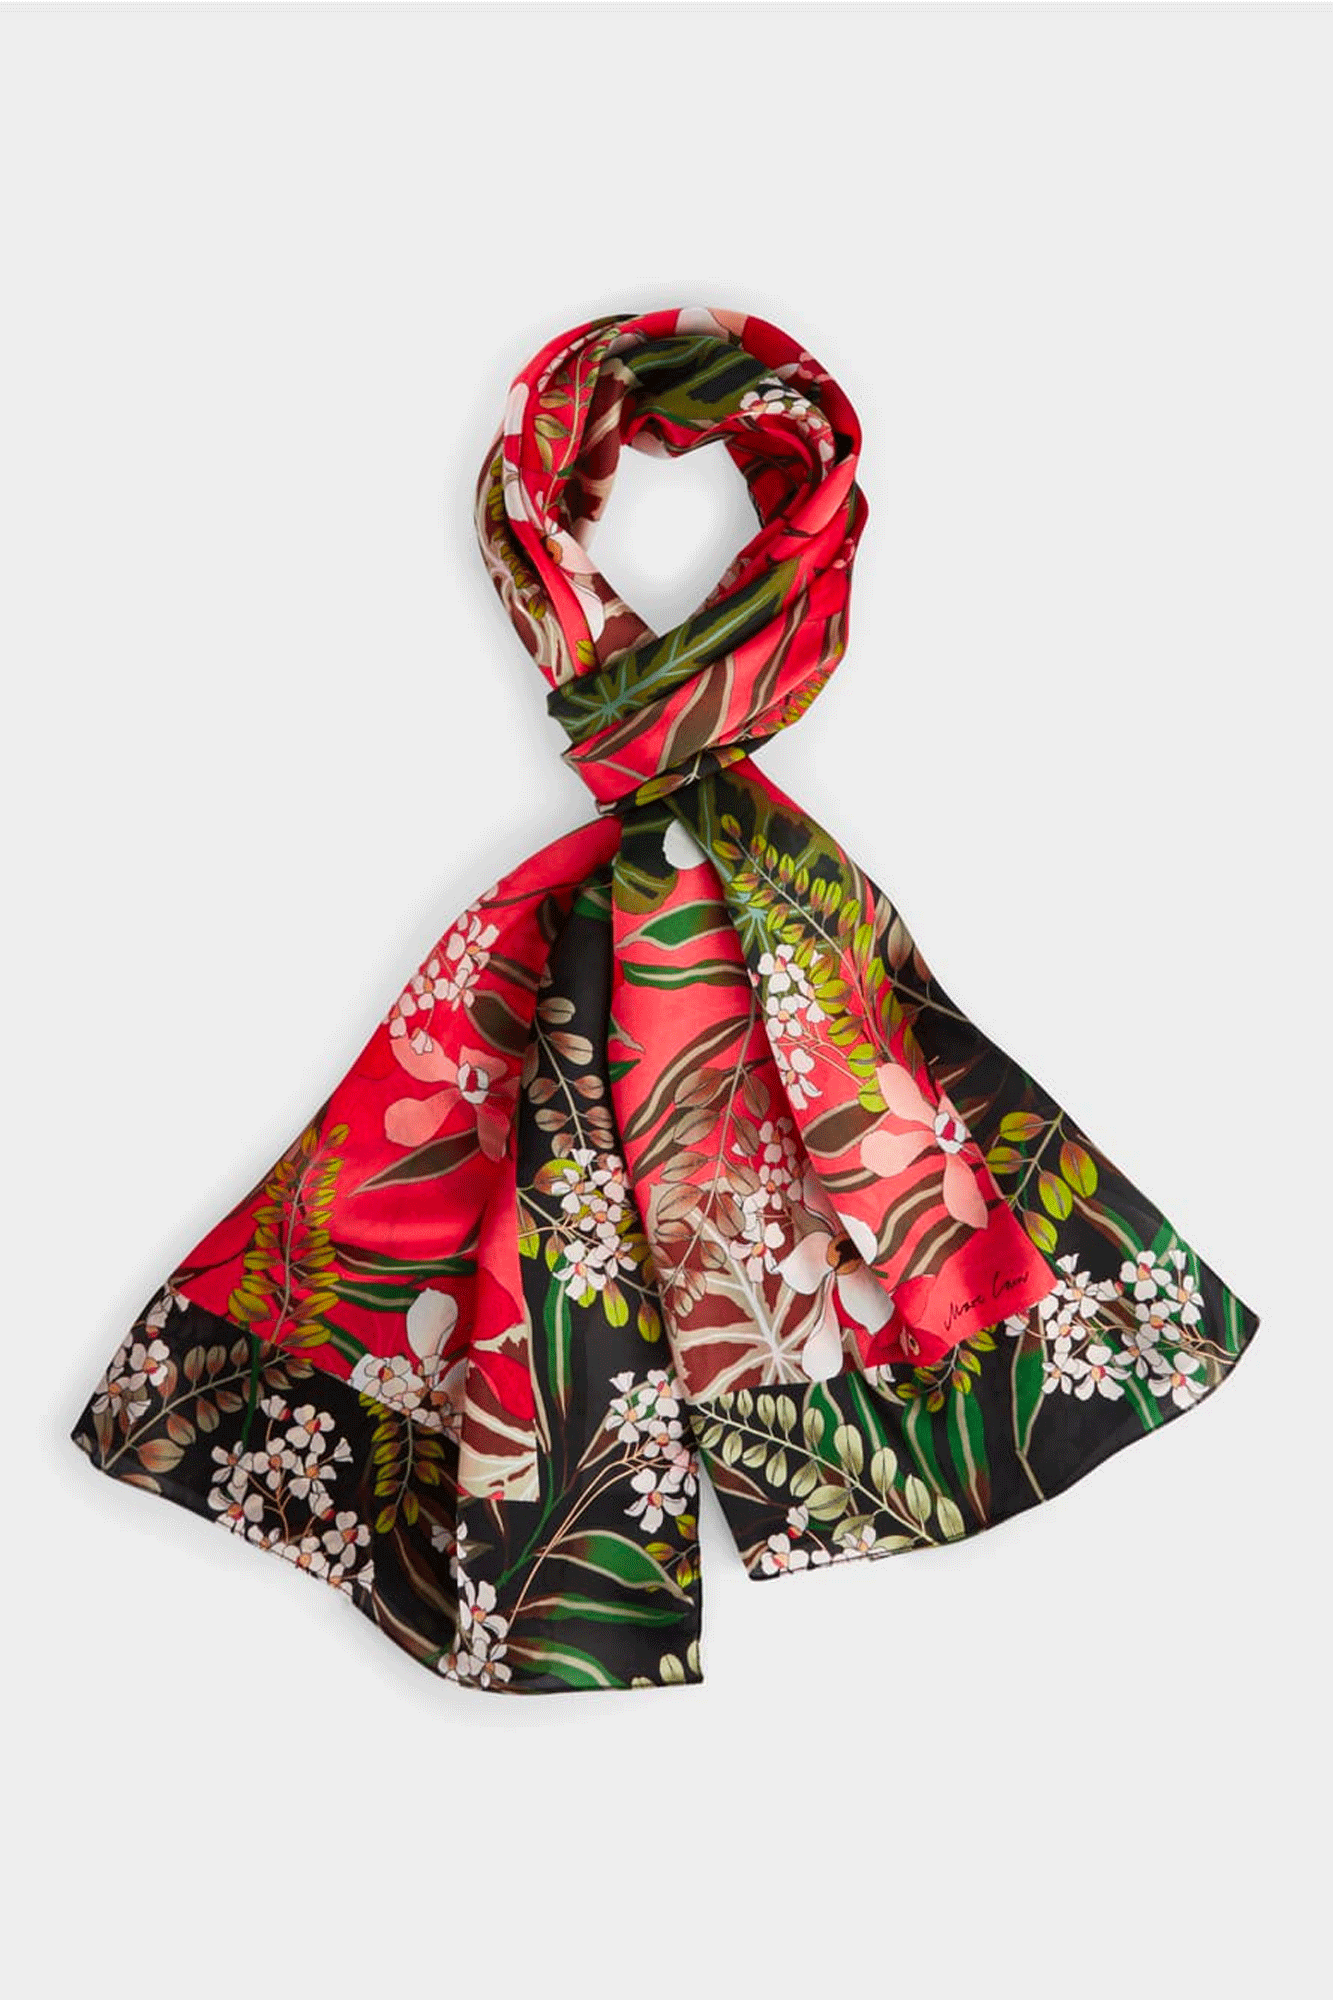 This alluring Night Train Scarf from Marc Cain is crafted from 100% silk, featuring an intricate all-over tropical floral pattern. The edges are finished with a deep contrasting colour and stitched for an extra special touch. Wrap yourself up in this luxurious, stylish piece for your next outing.